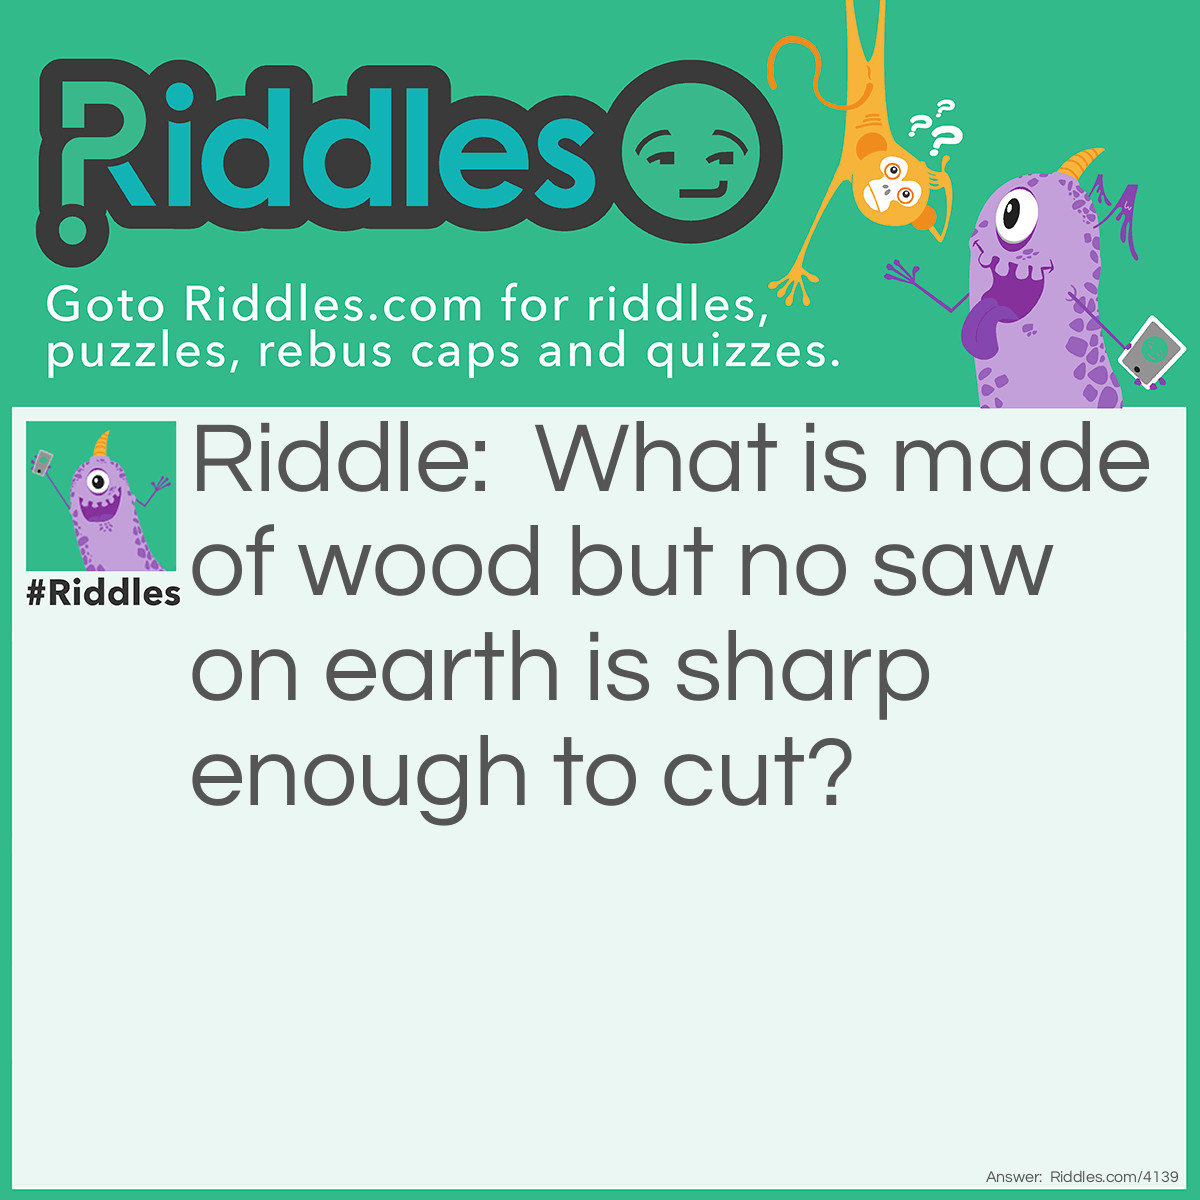 Riddle: What is made of wood but no saw on earth is sharp enough to cut? Answer: Sawdust.